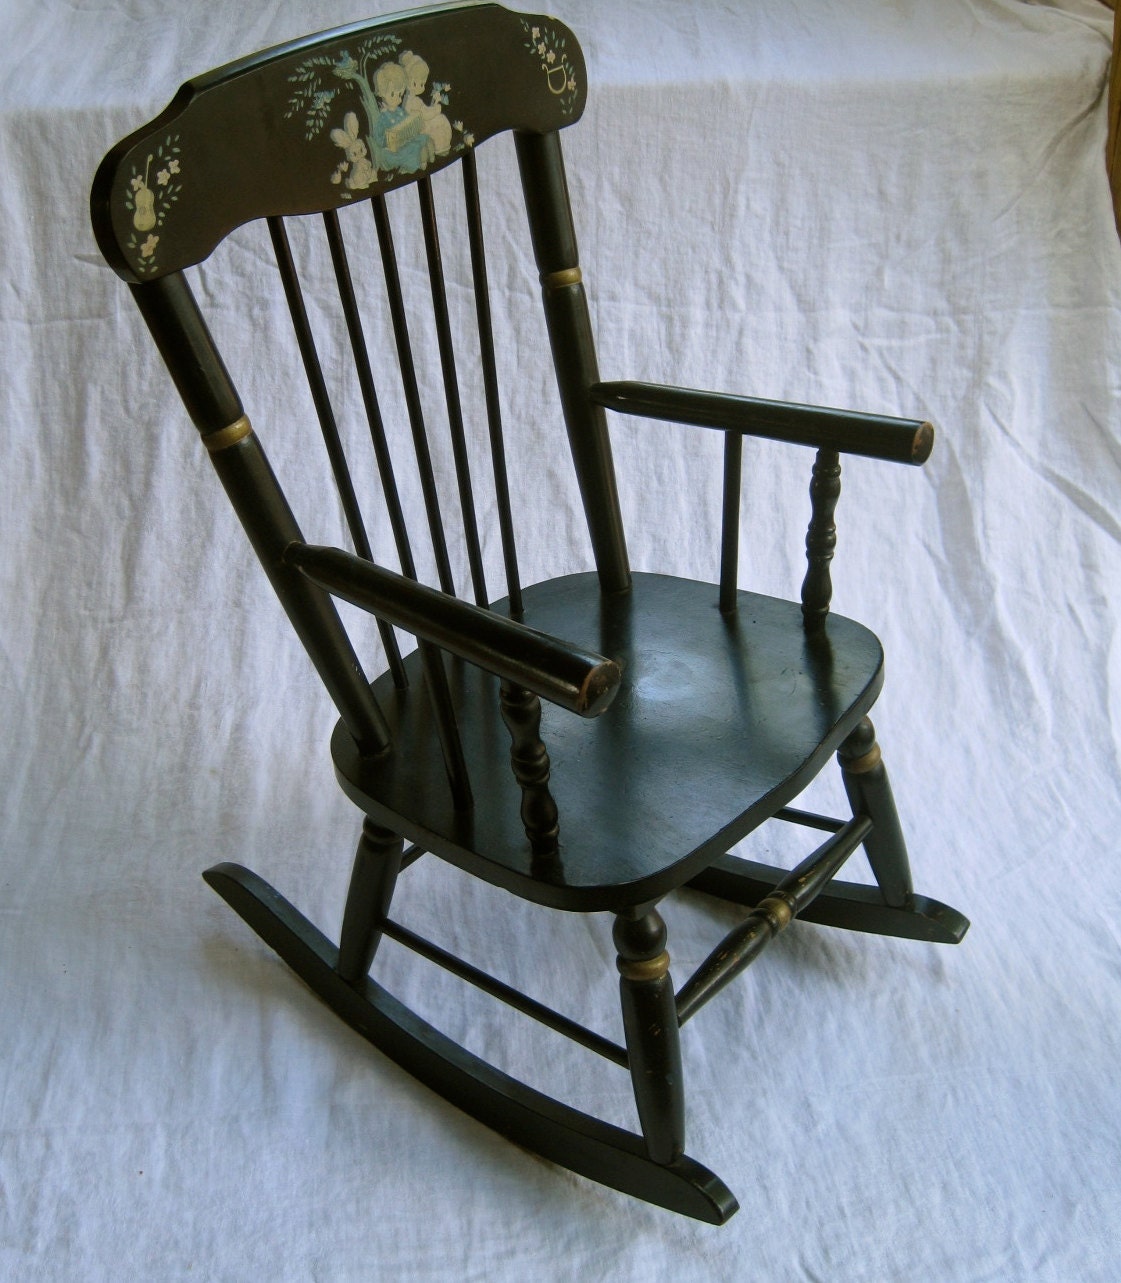 Children's musical rocking chair vintage made by